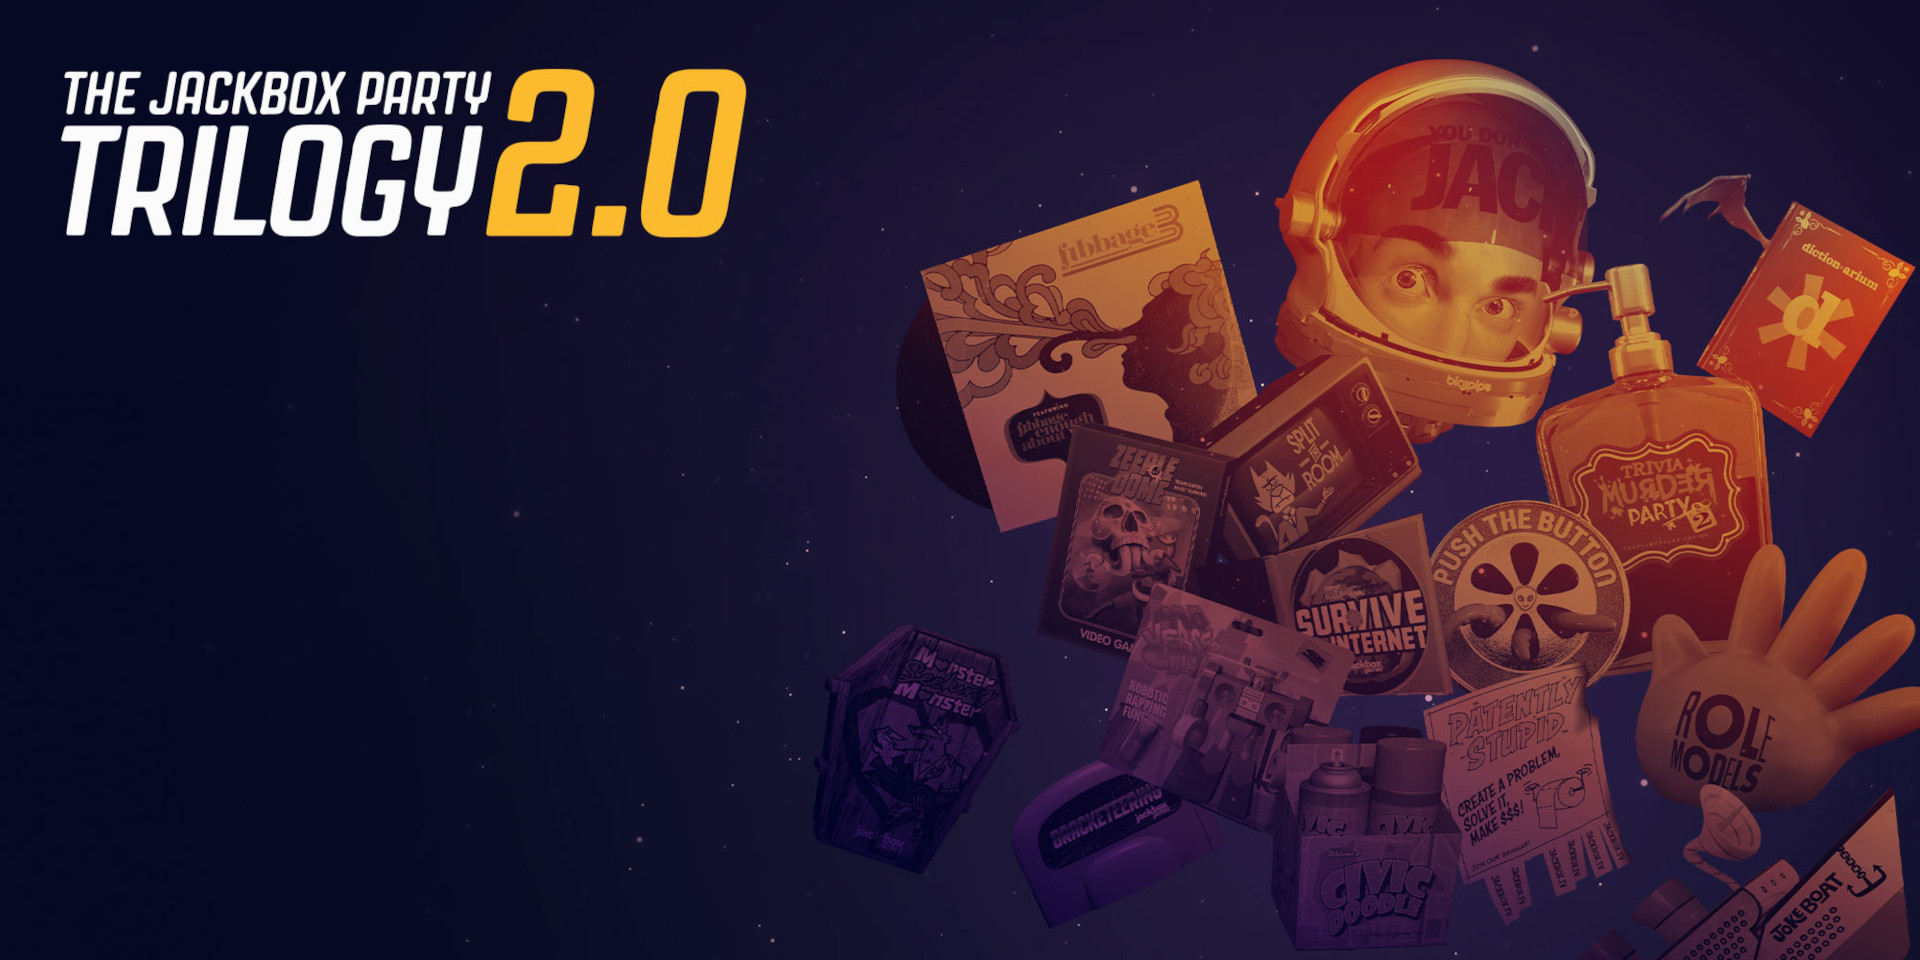 The Jackbox Party Pack Trilogy 2.0 Steam CD Key 47.83 $